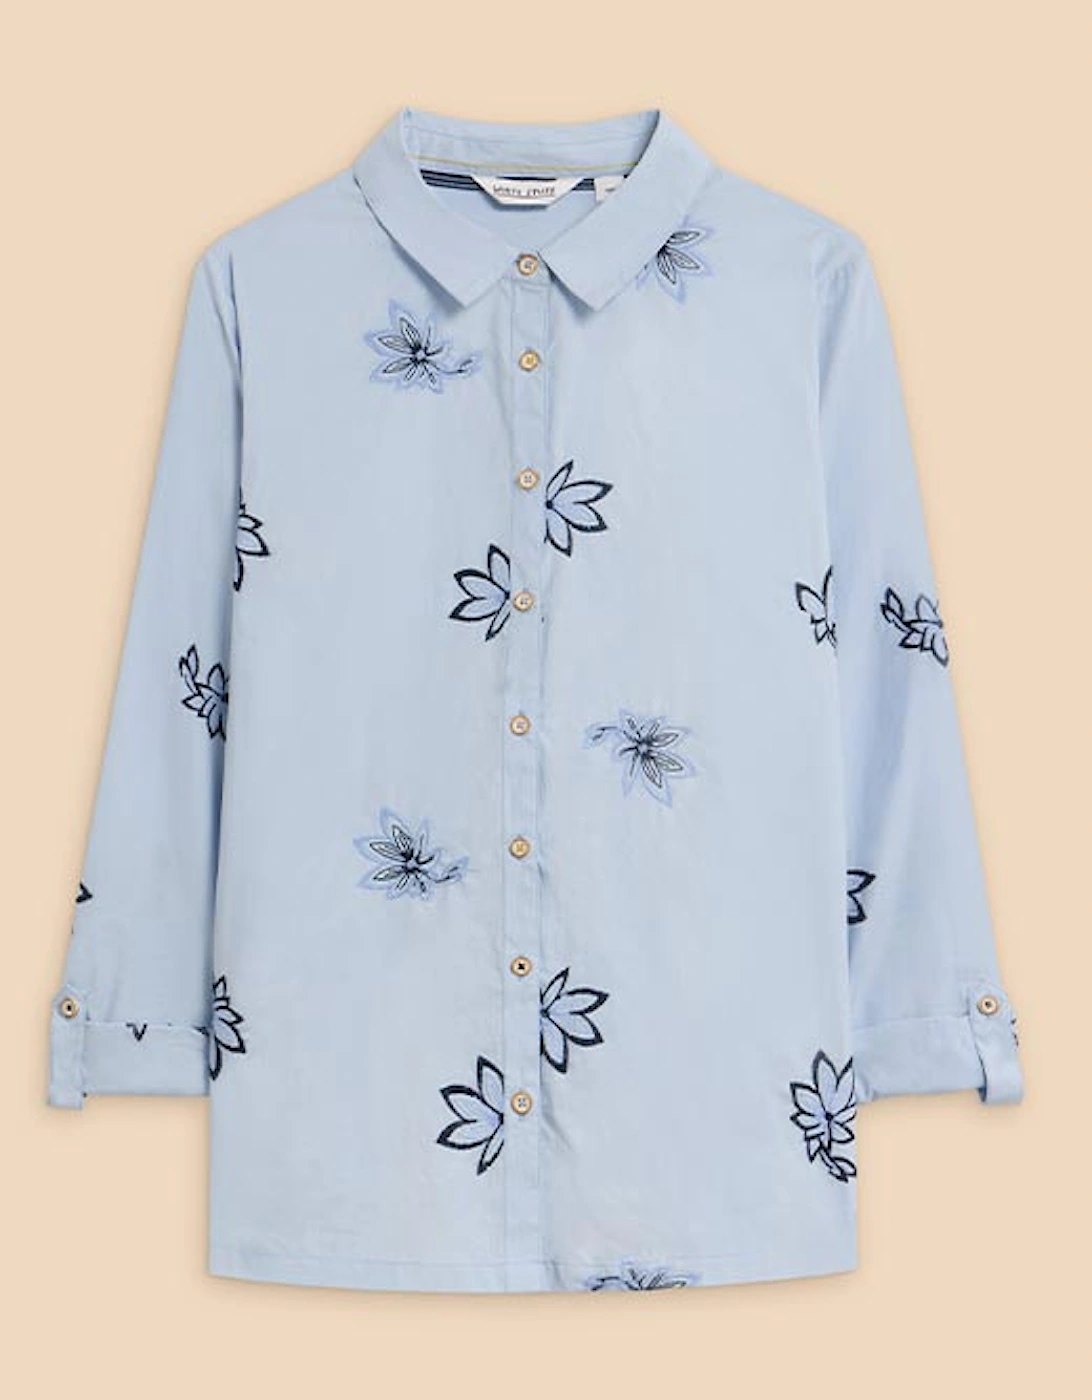 Women's Sophie Embroidered Shirt Blue Multi